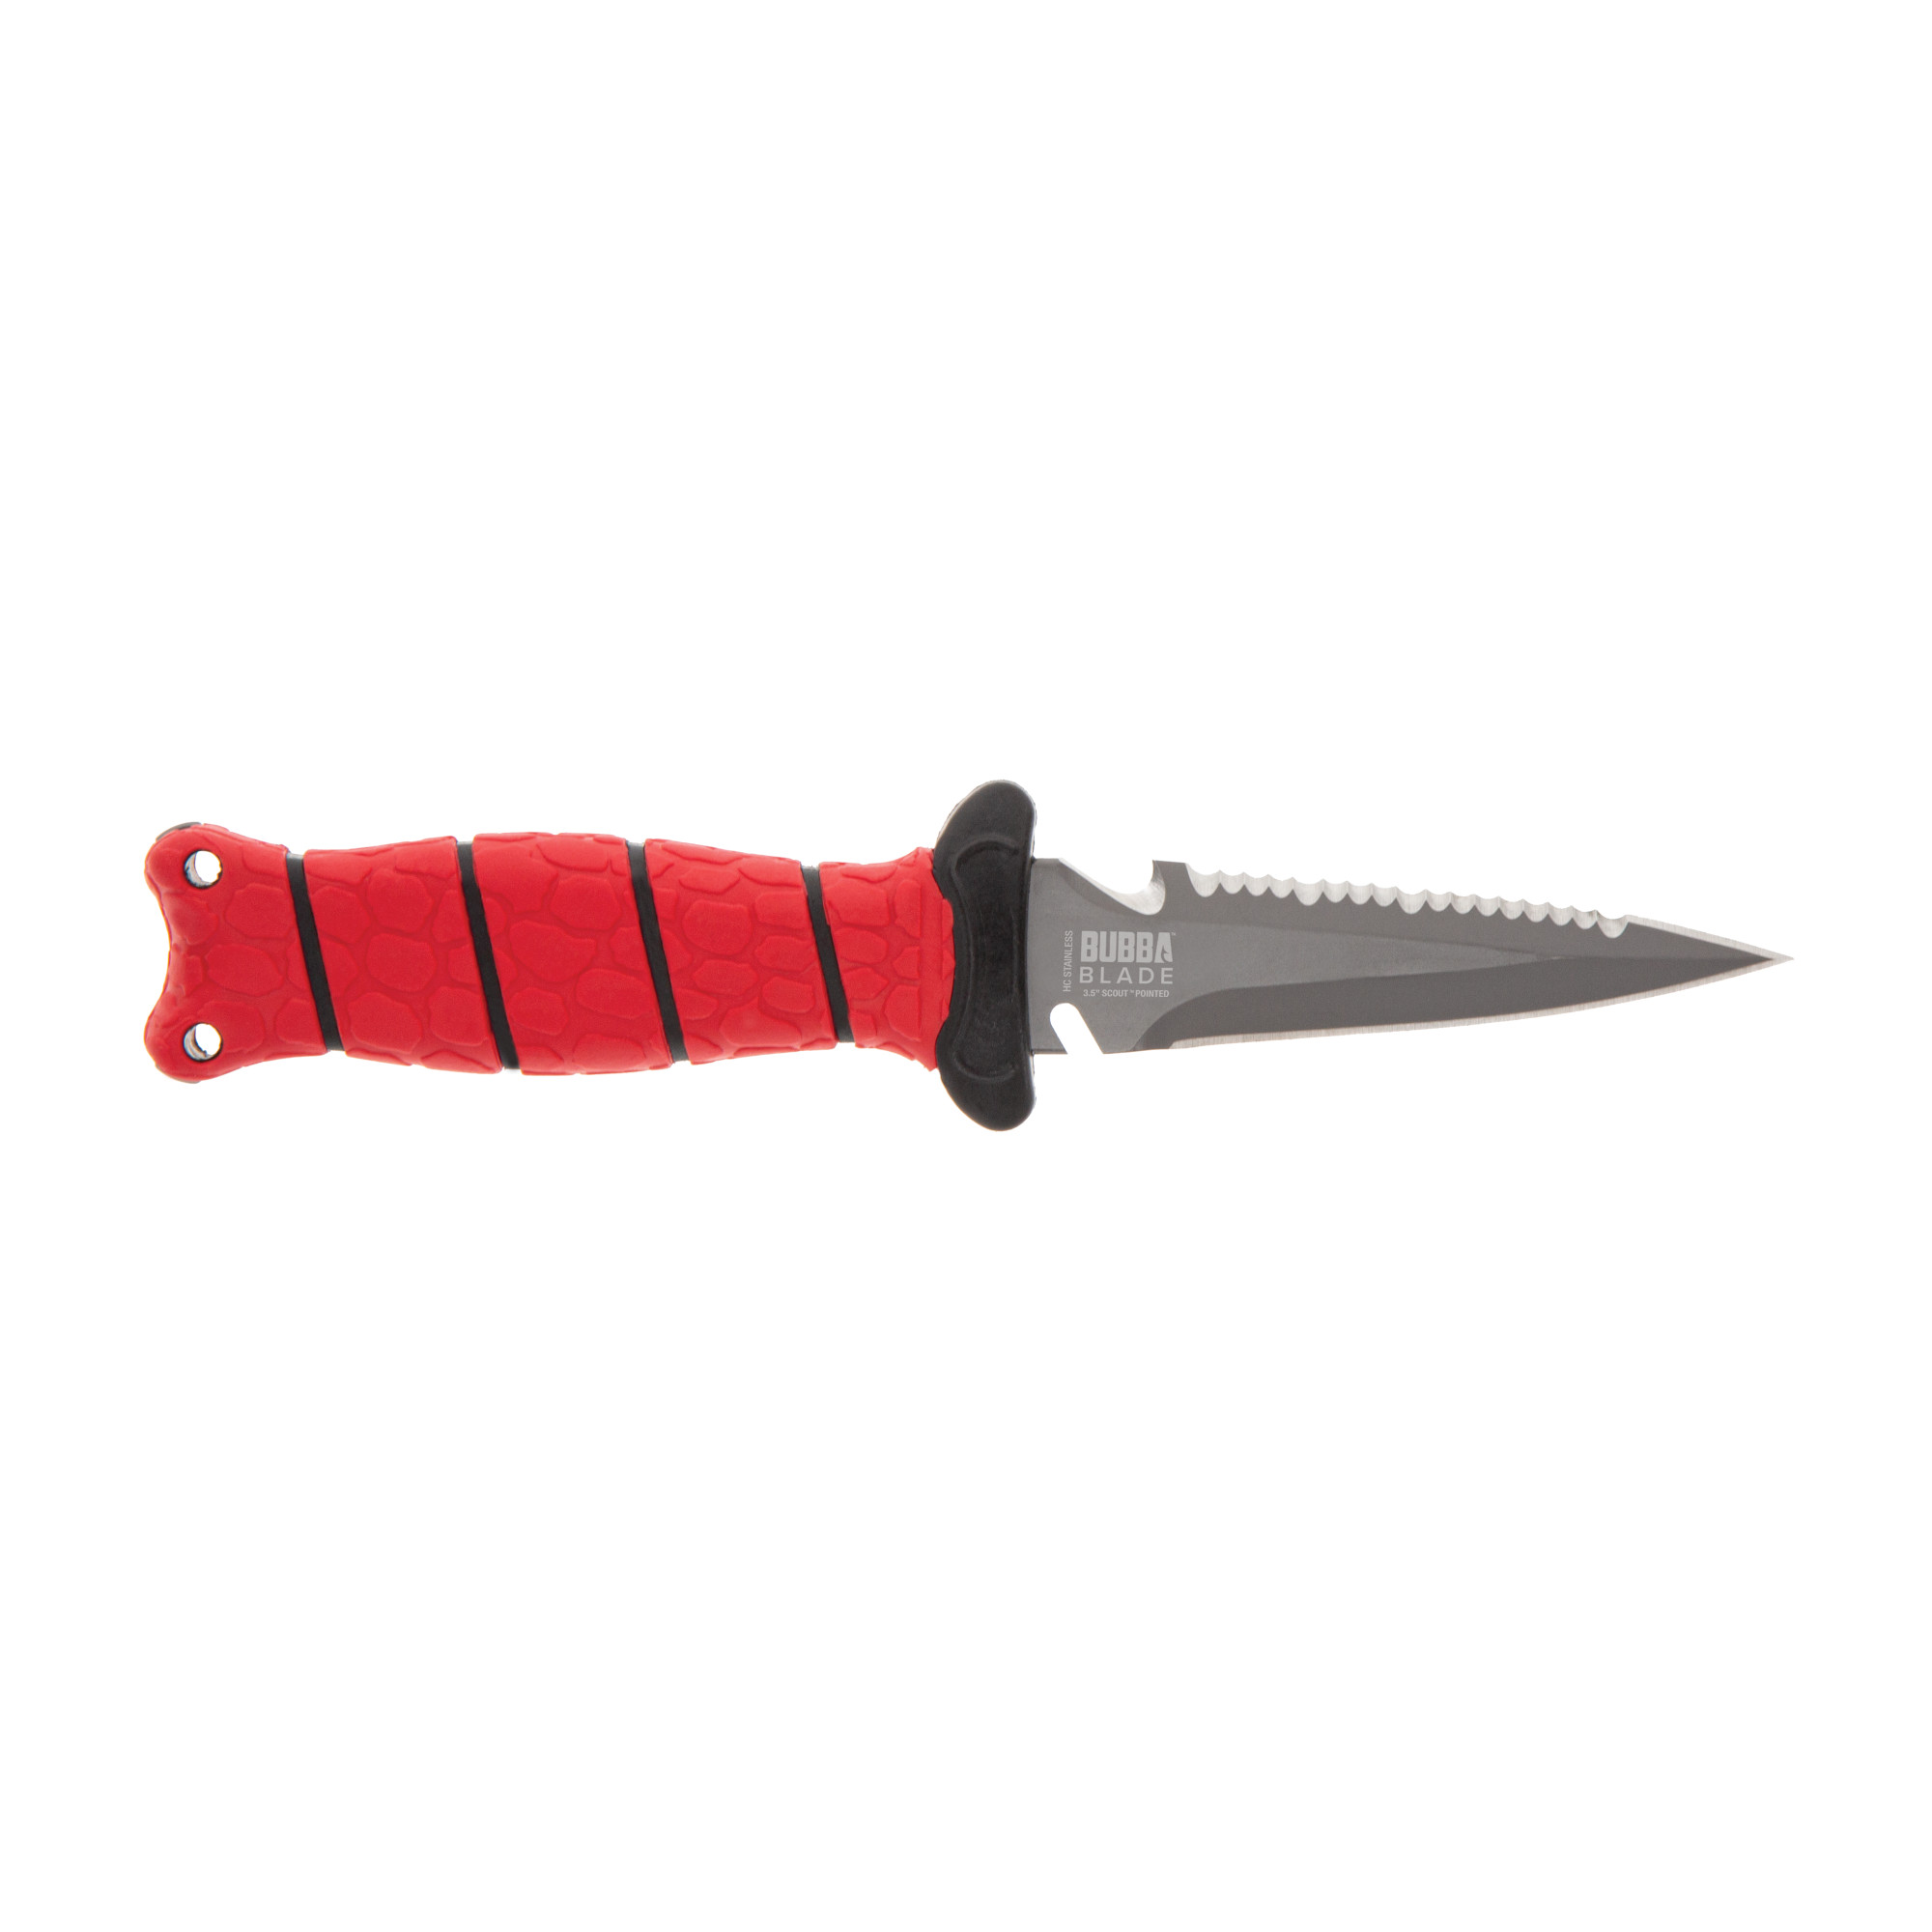 Bubba 3.5 Pointed Dive Knife – Sportsman's Outfitters